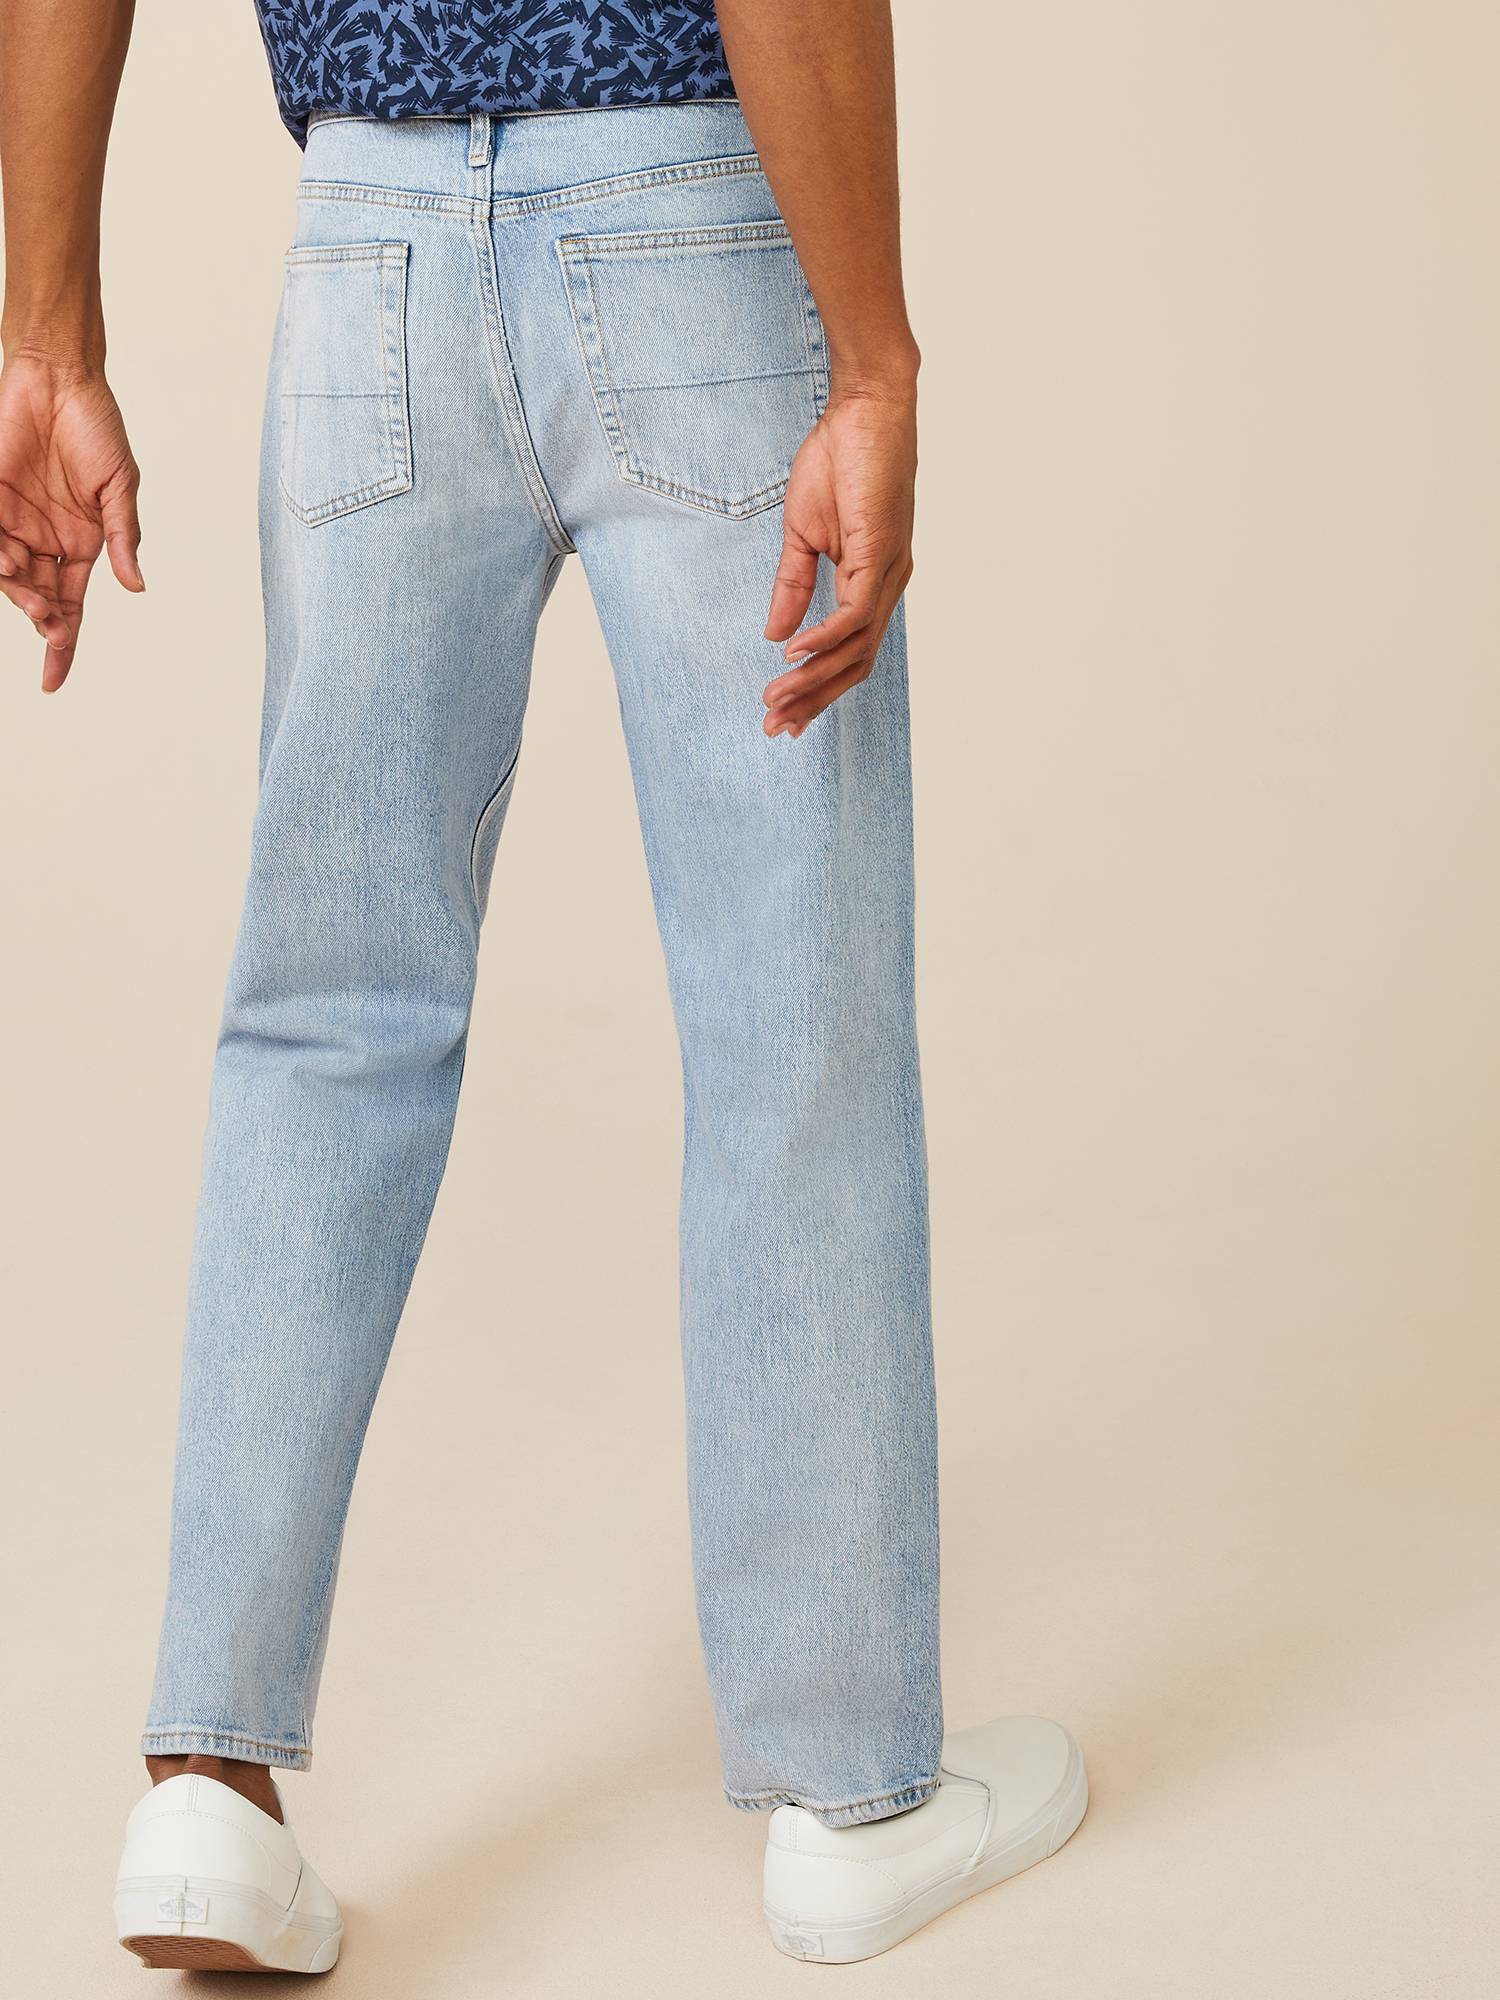 Free Assembly Men's Easy Beach Jeans - image 5 of 7